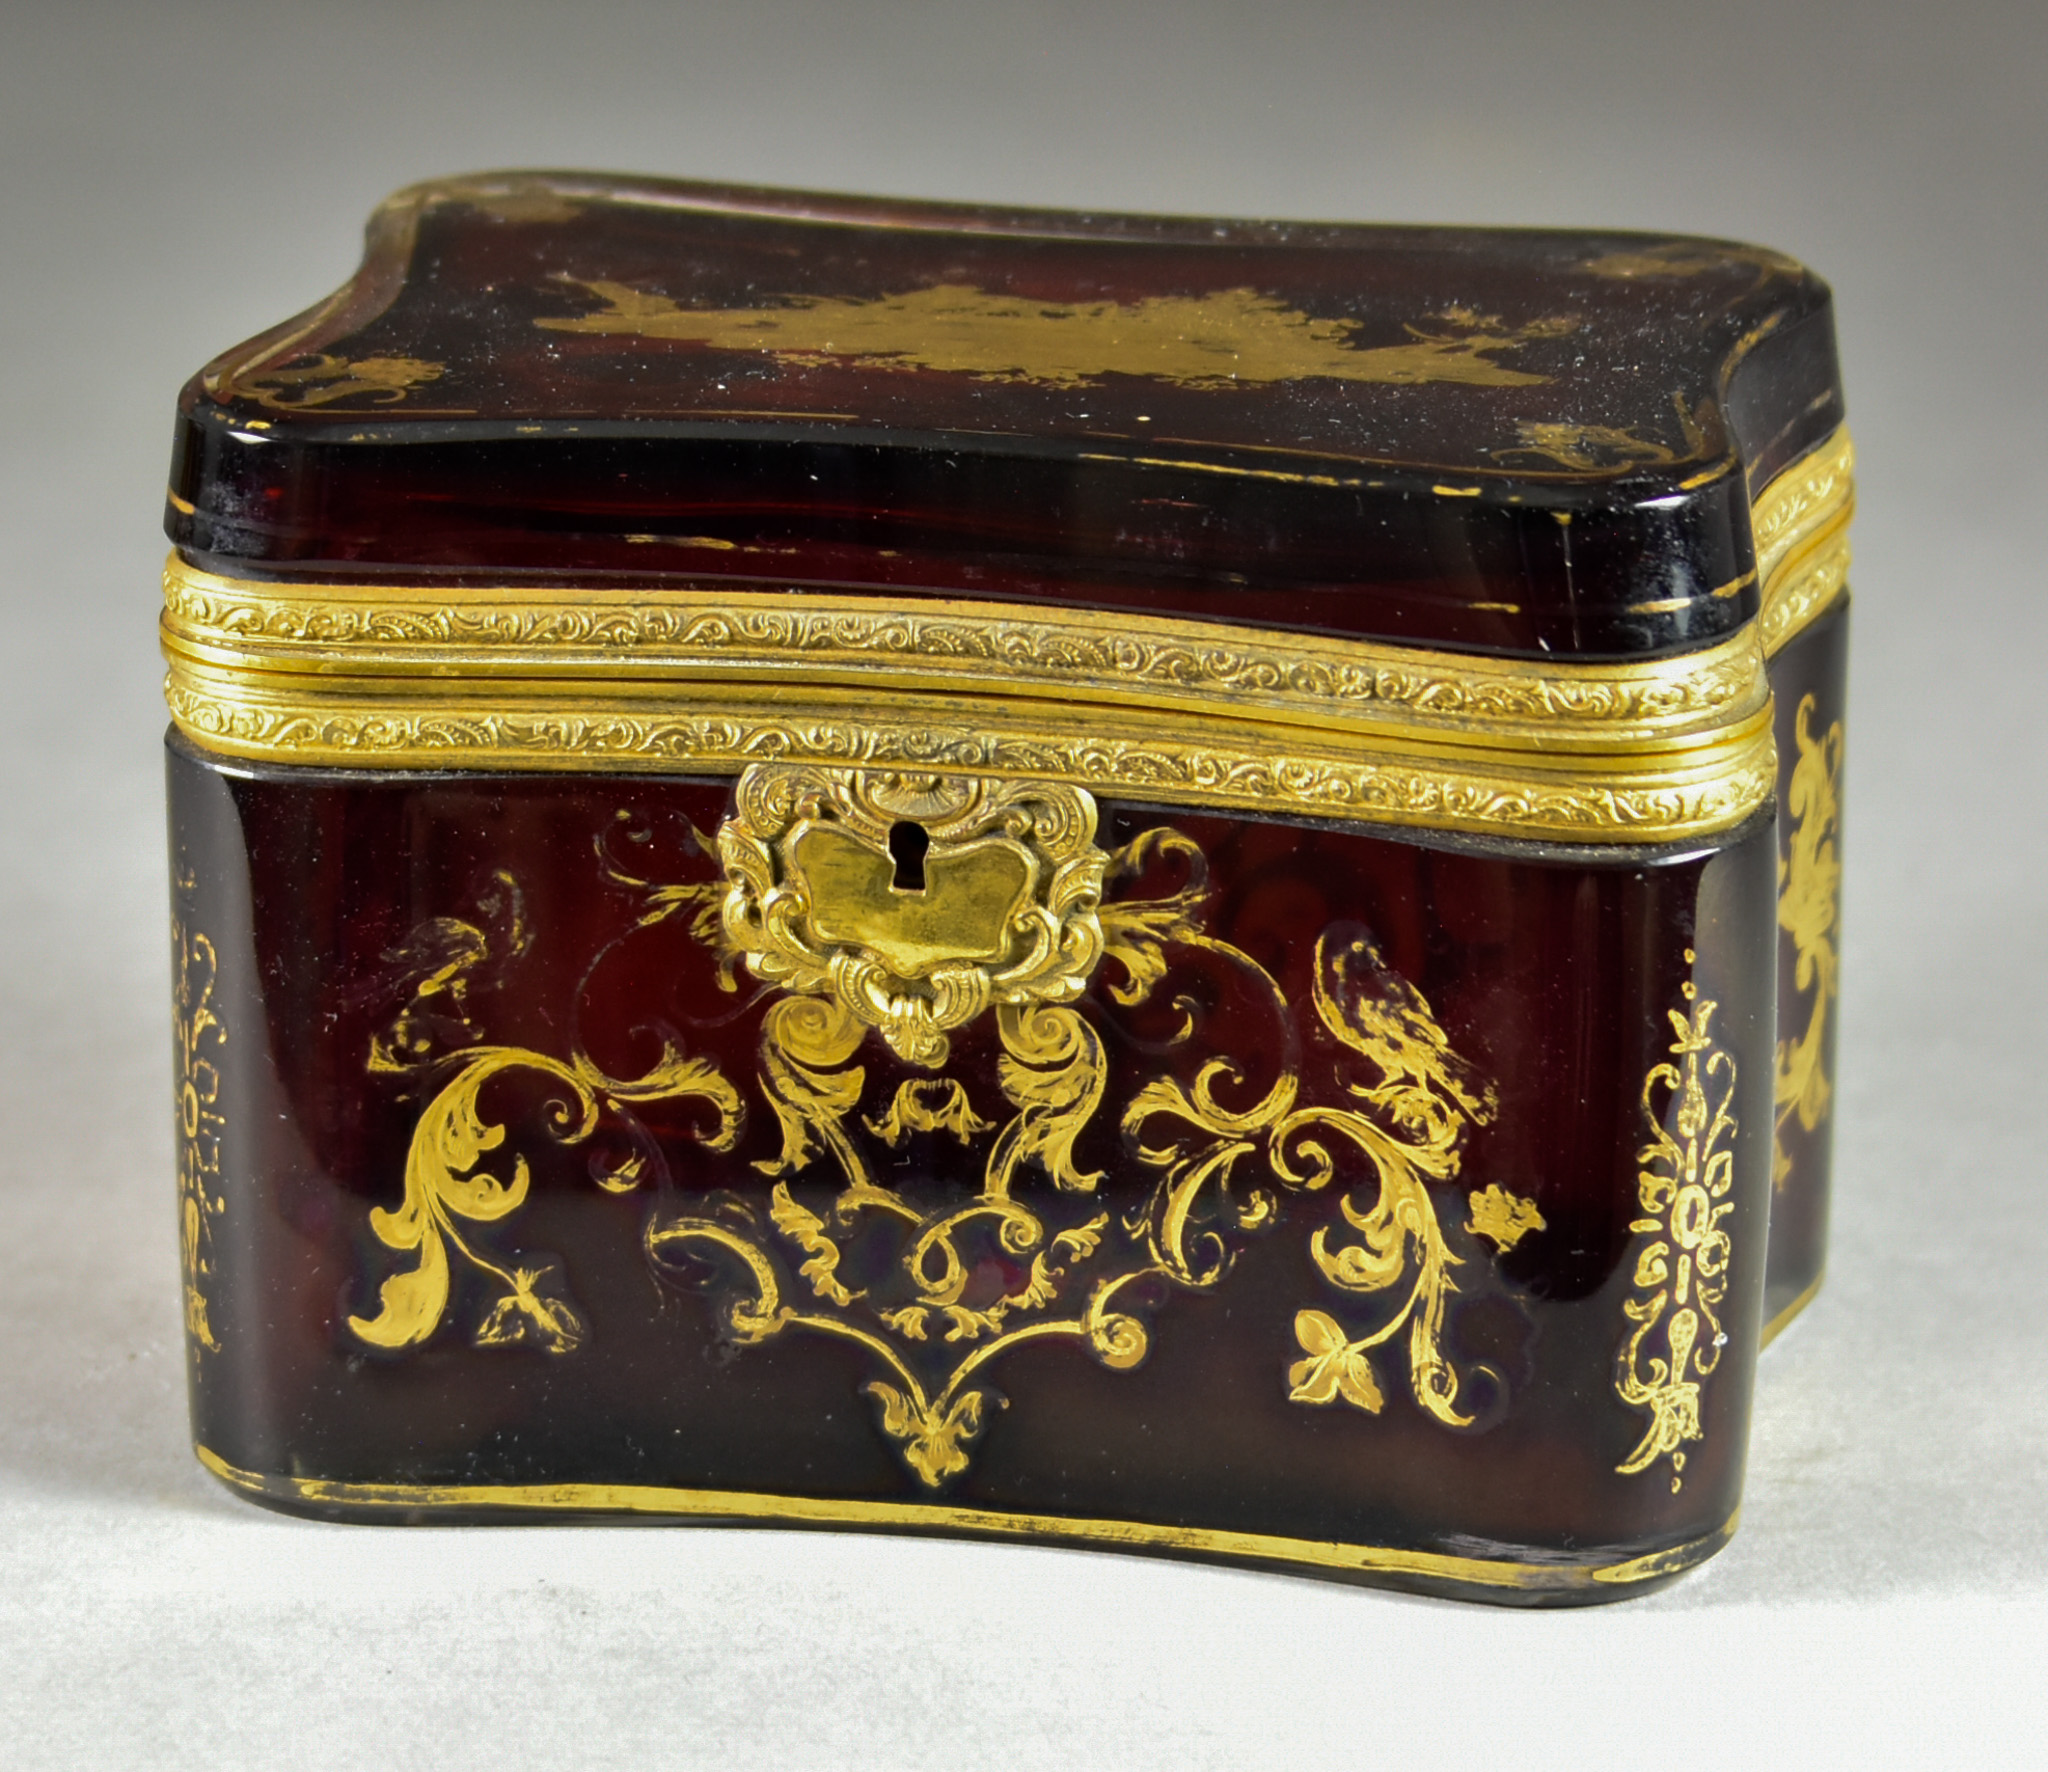 A Ruby Glass and Gilt Metal Mounted Rectangular Casket with Incurved Sides, 19th Century,